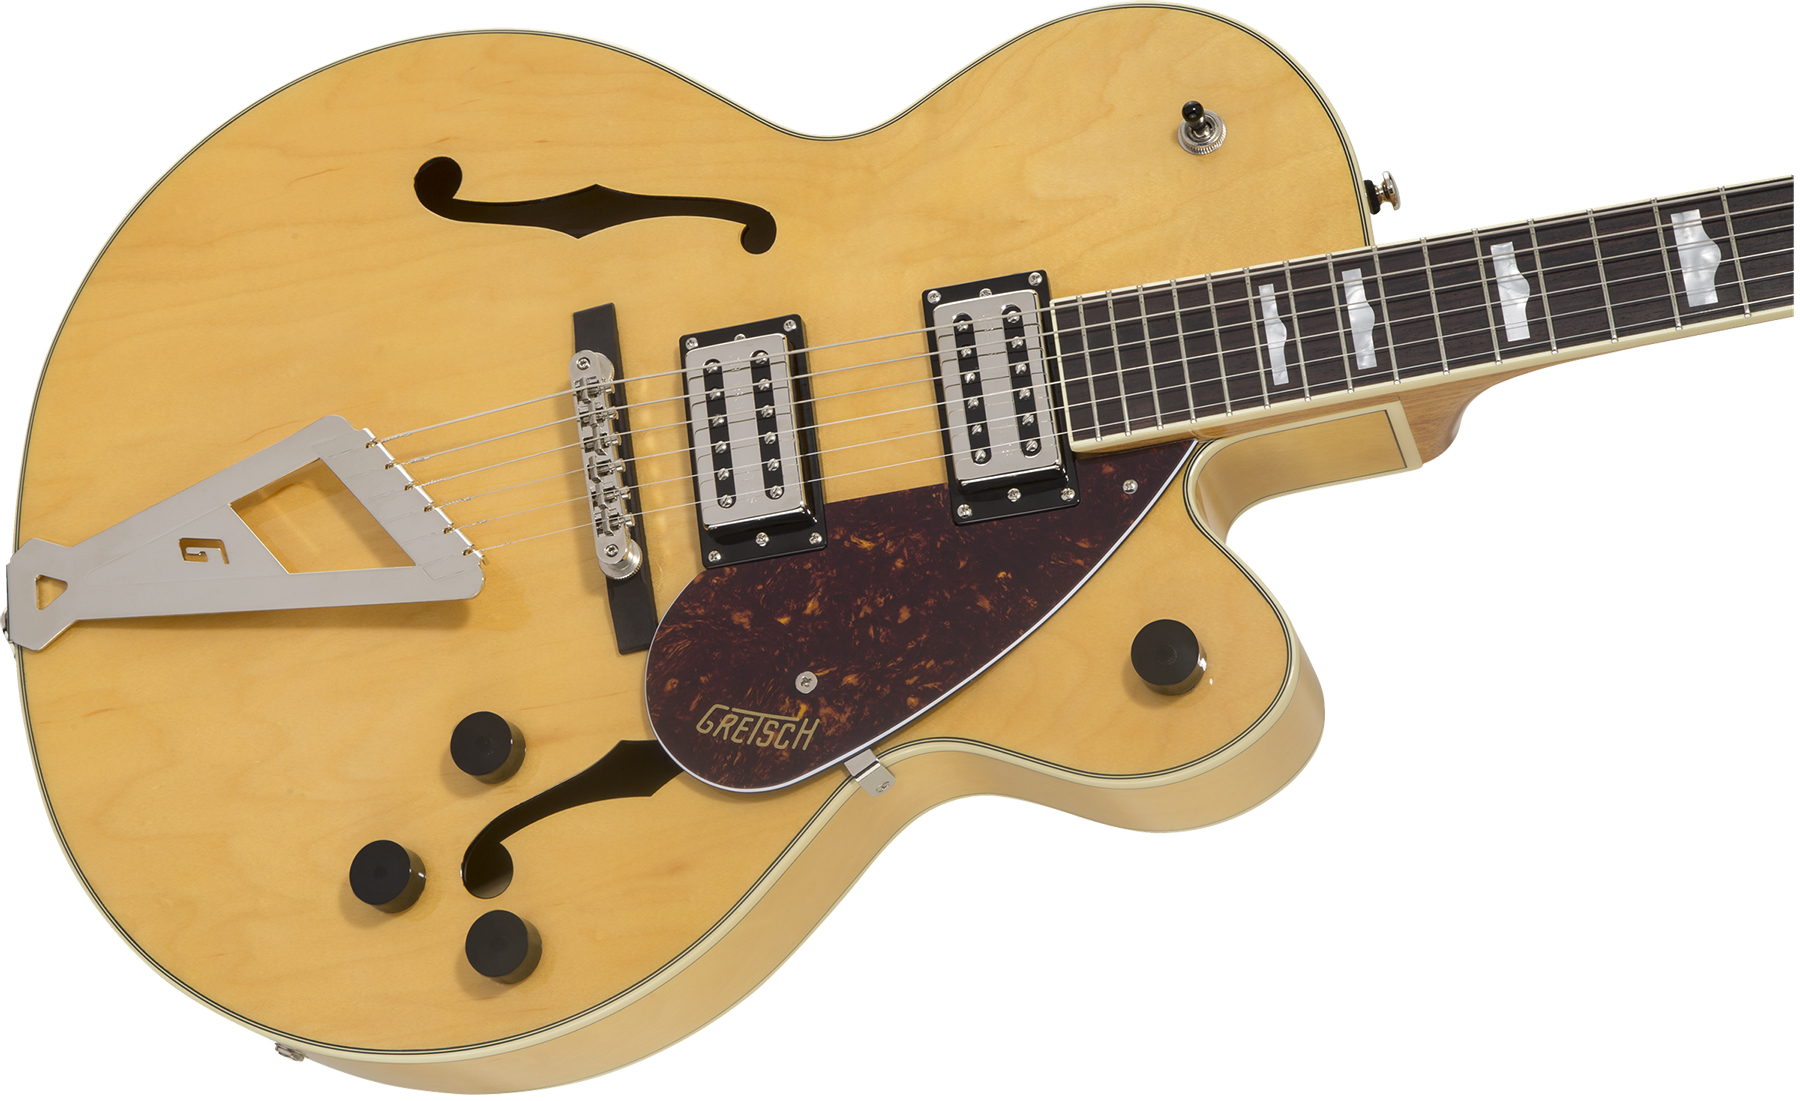 Gretsch G2420 Streamliner Hollow Body With Chromatic Ii Hh Ht Lau - Village Amber - Semi-hollow electric guitar - Variation 2